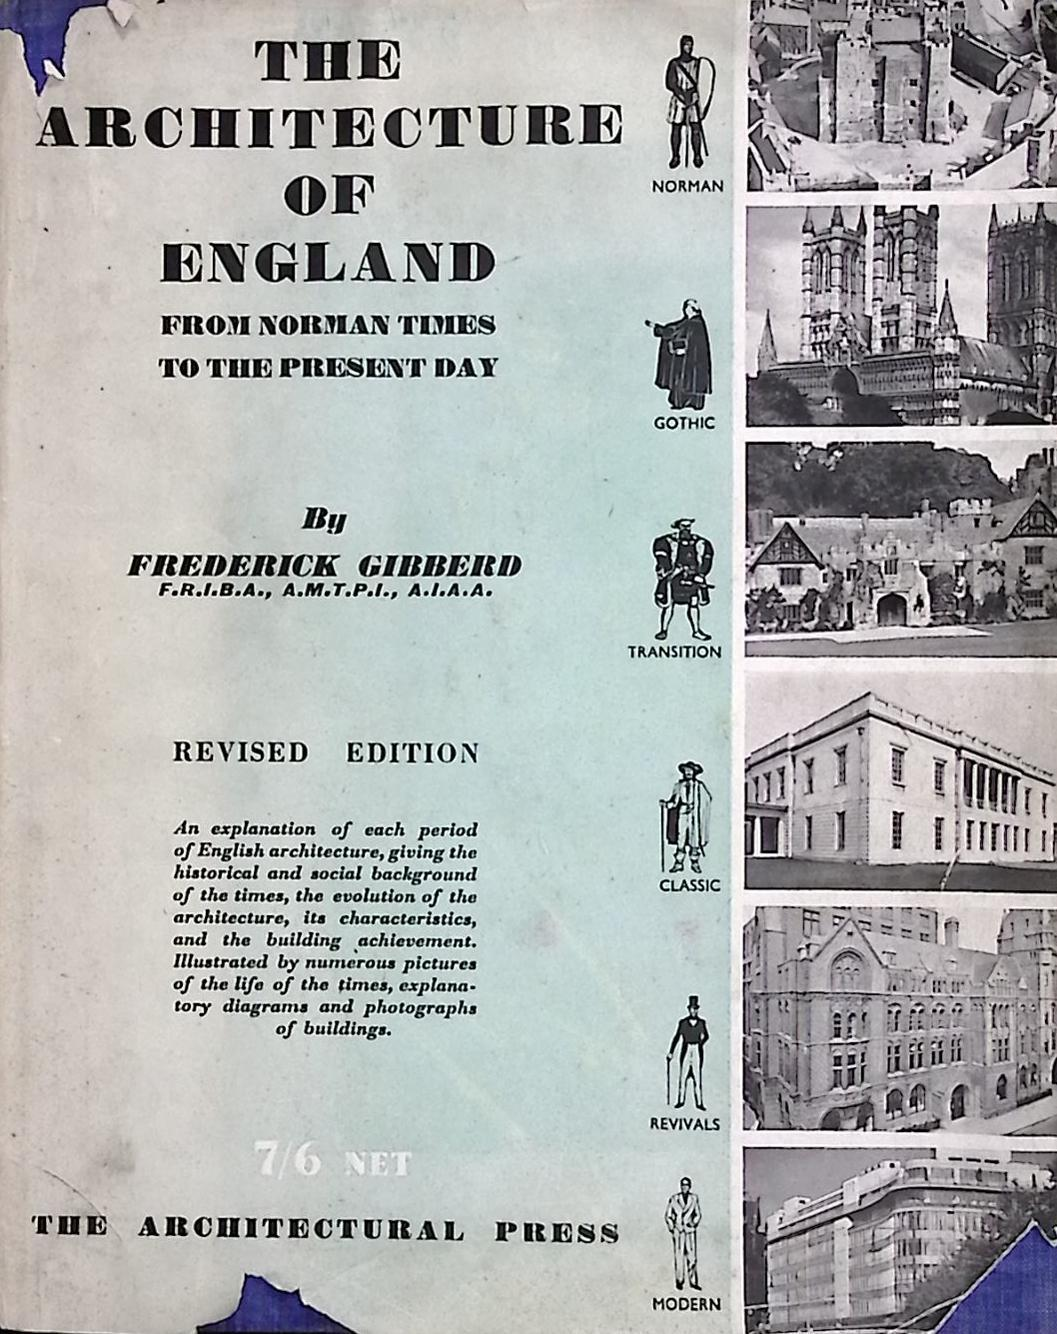 The Architecture of England from Norman Times to the Present Day